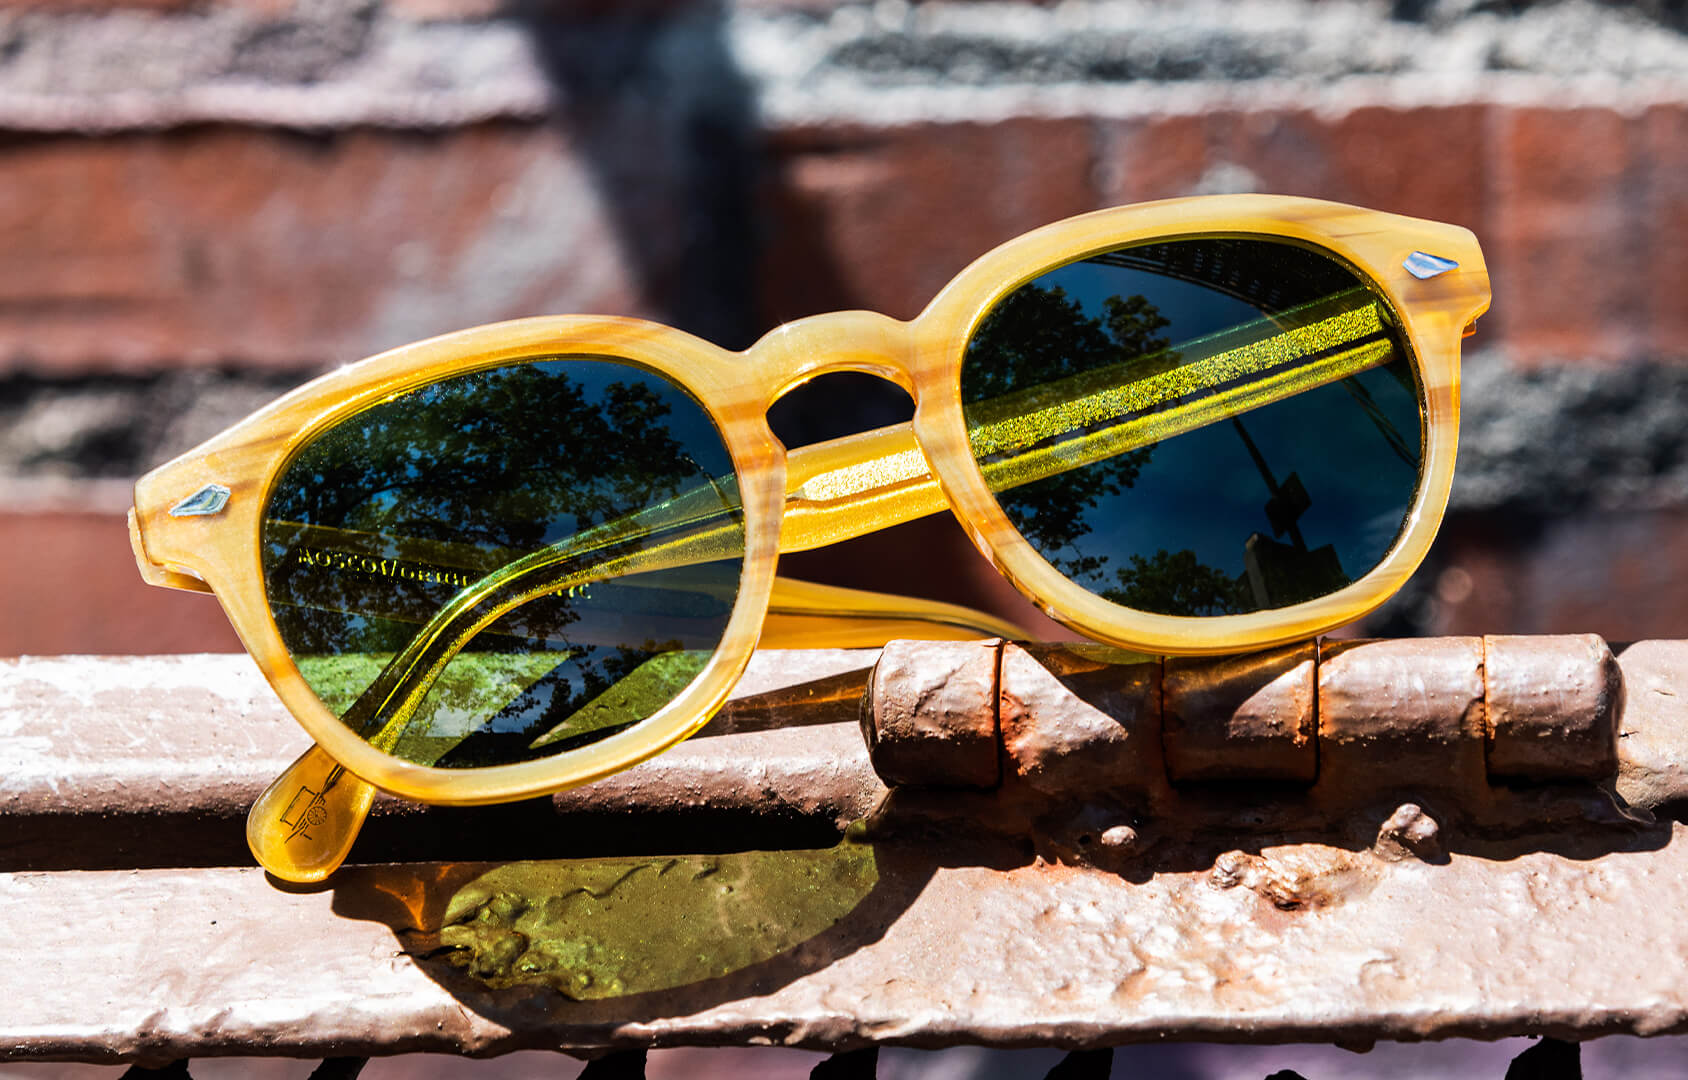 How to choose the best sunglasses for your face | United States